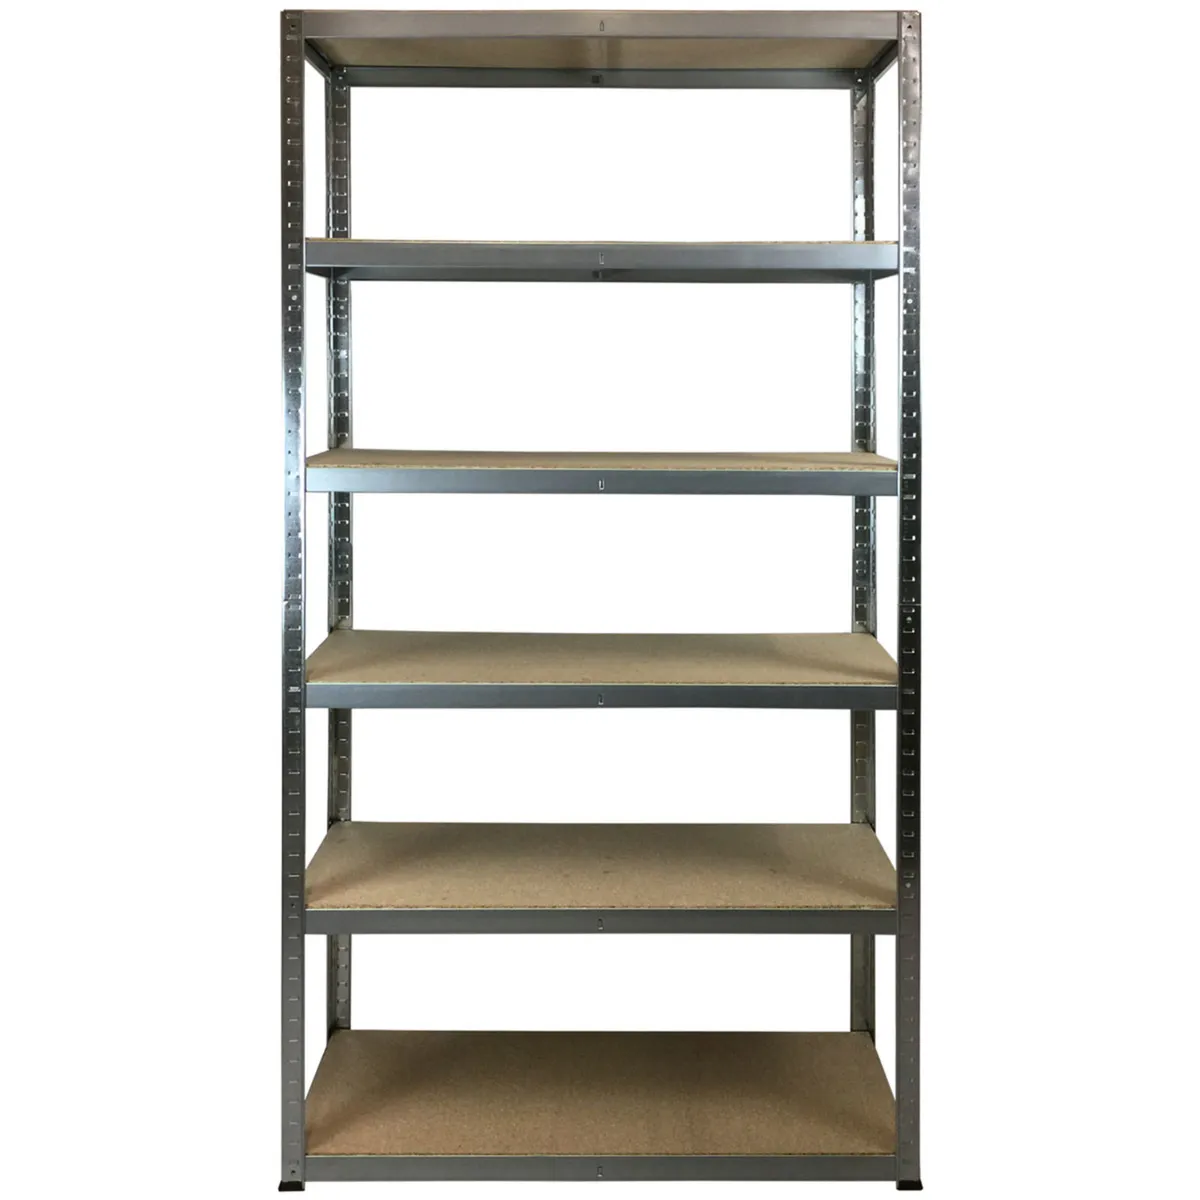 5 Shelving bays 1960h x 1000L x 400D Free Delivery